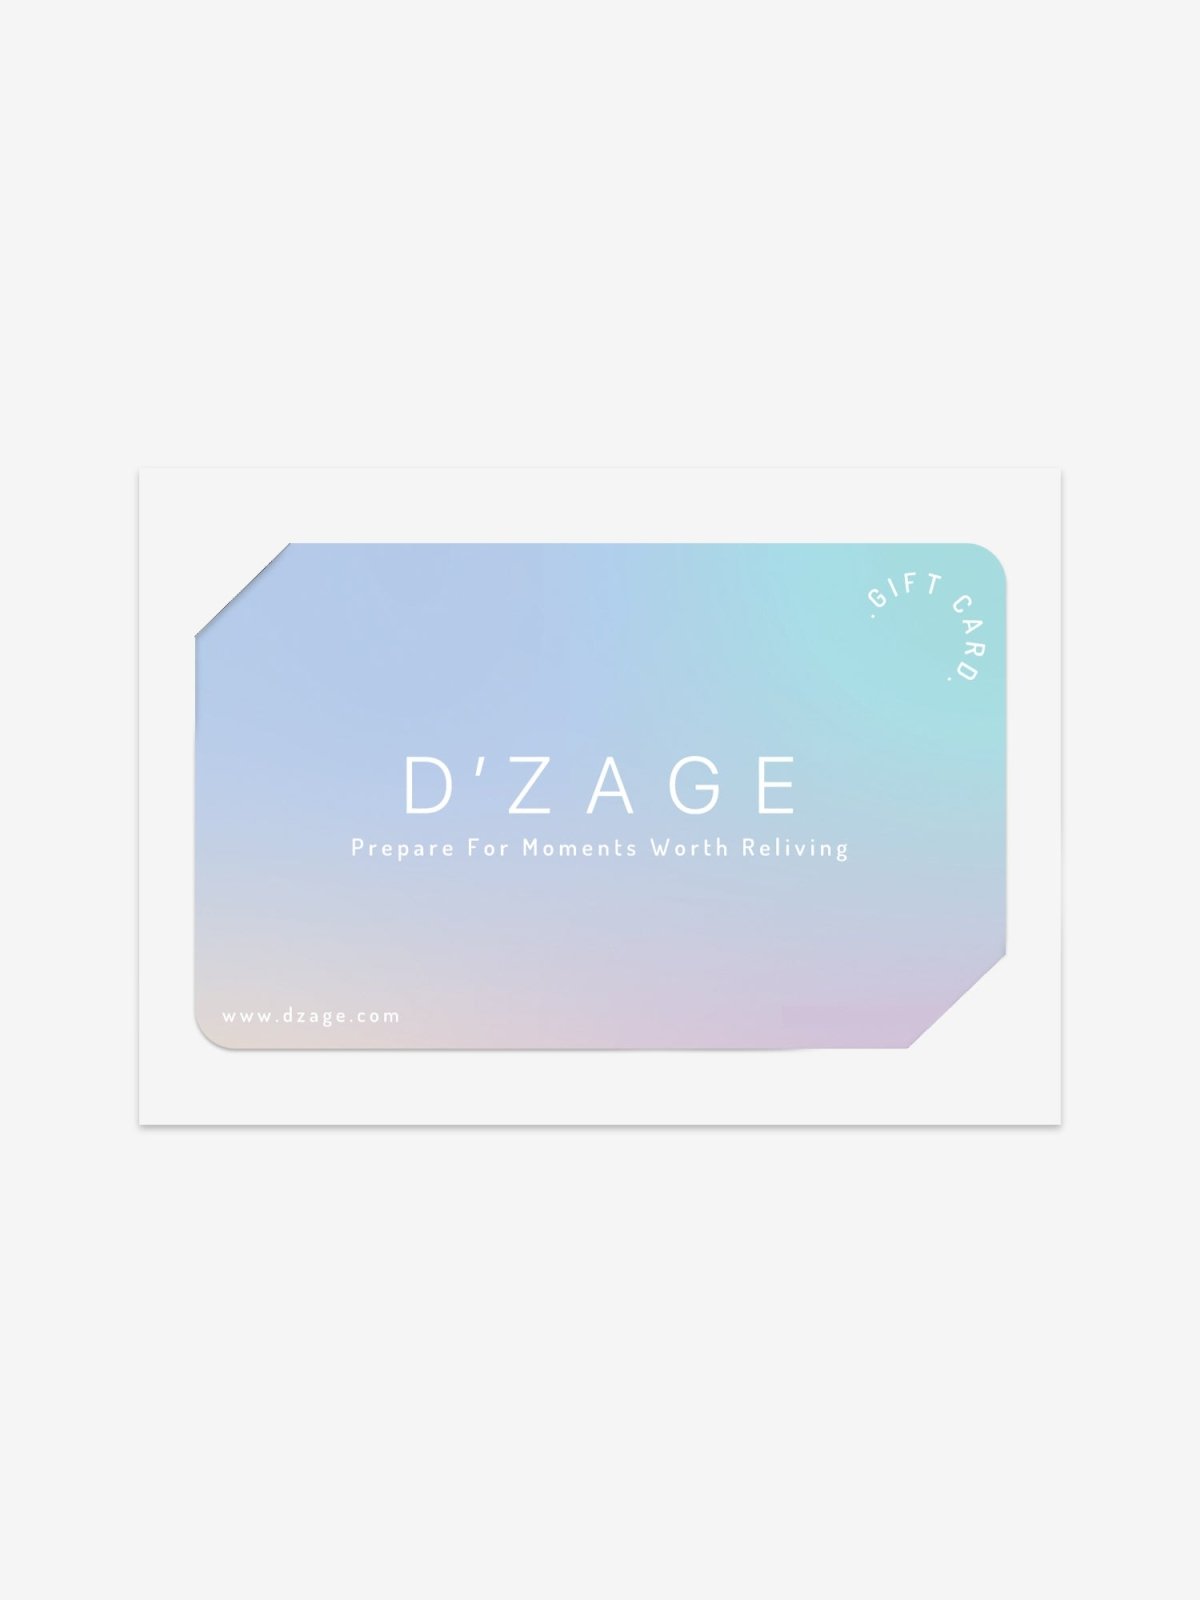 Physical Gift Card - DAG-GIFTPhys500 - $500 - - D'ZAGE Designs